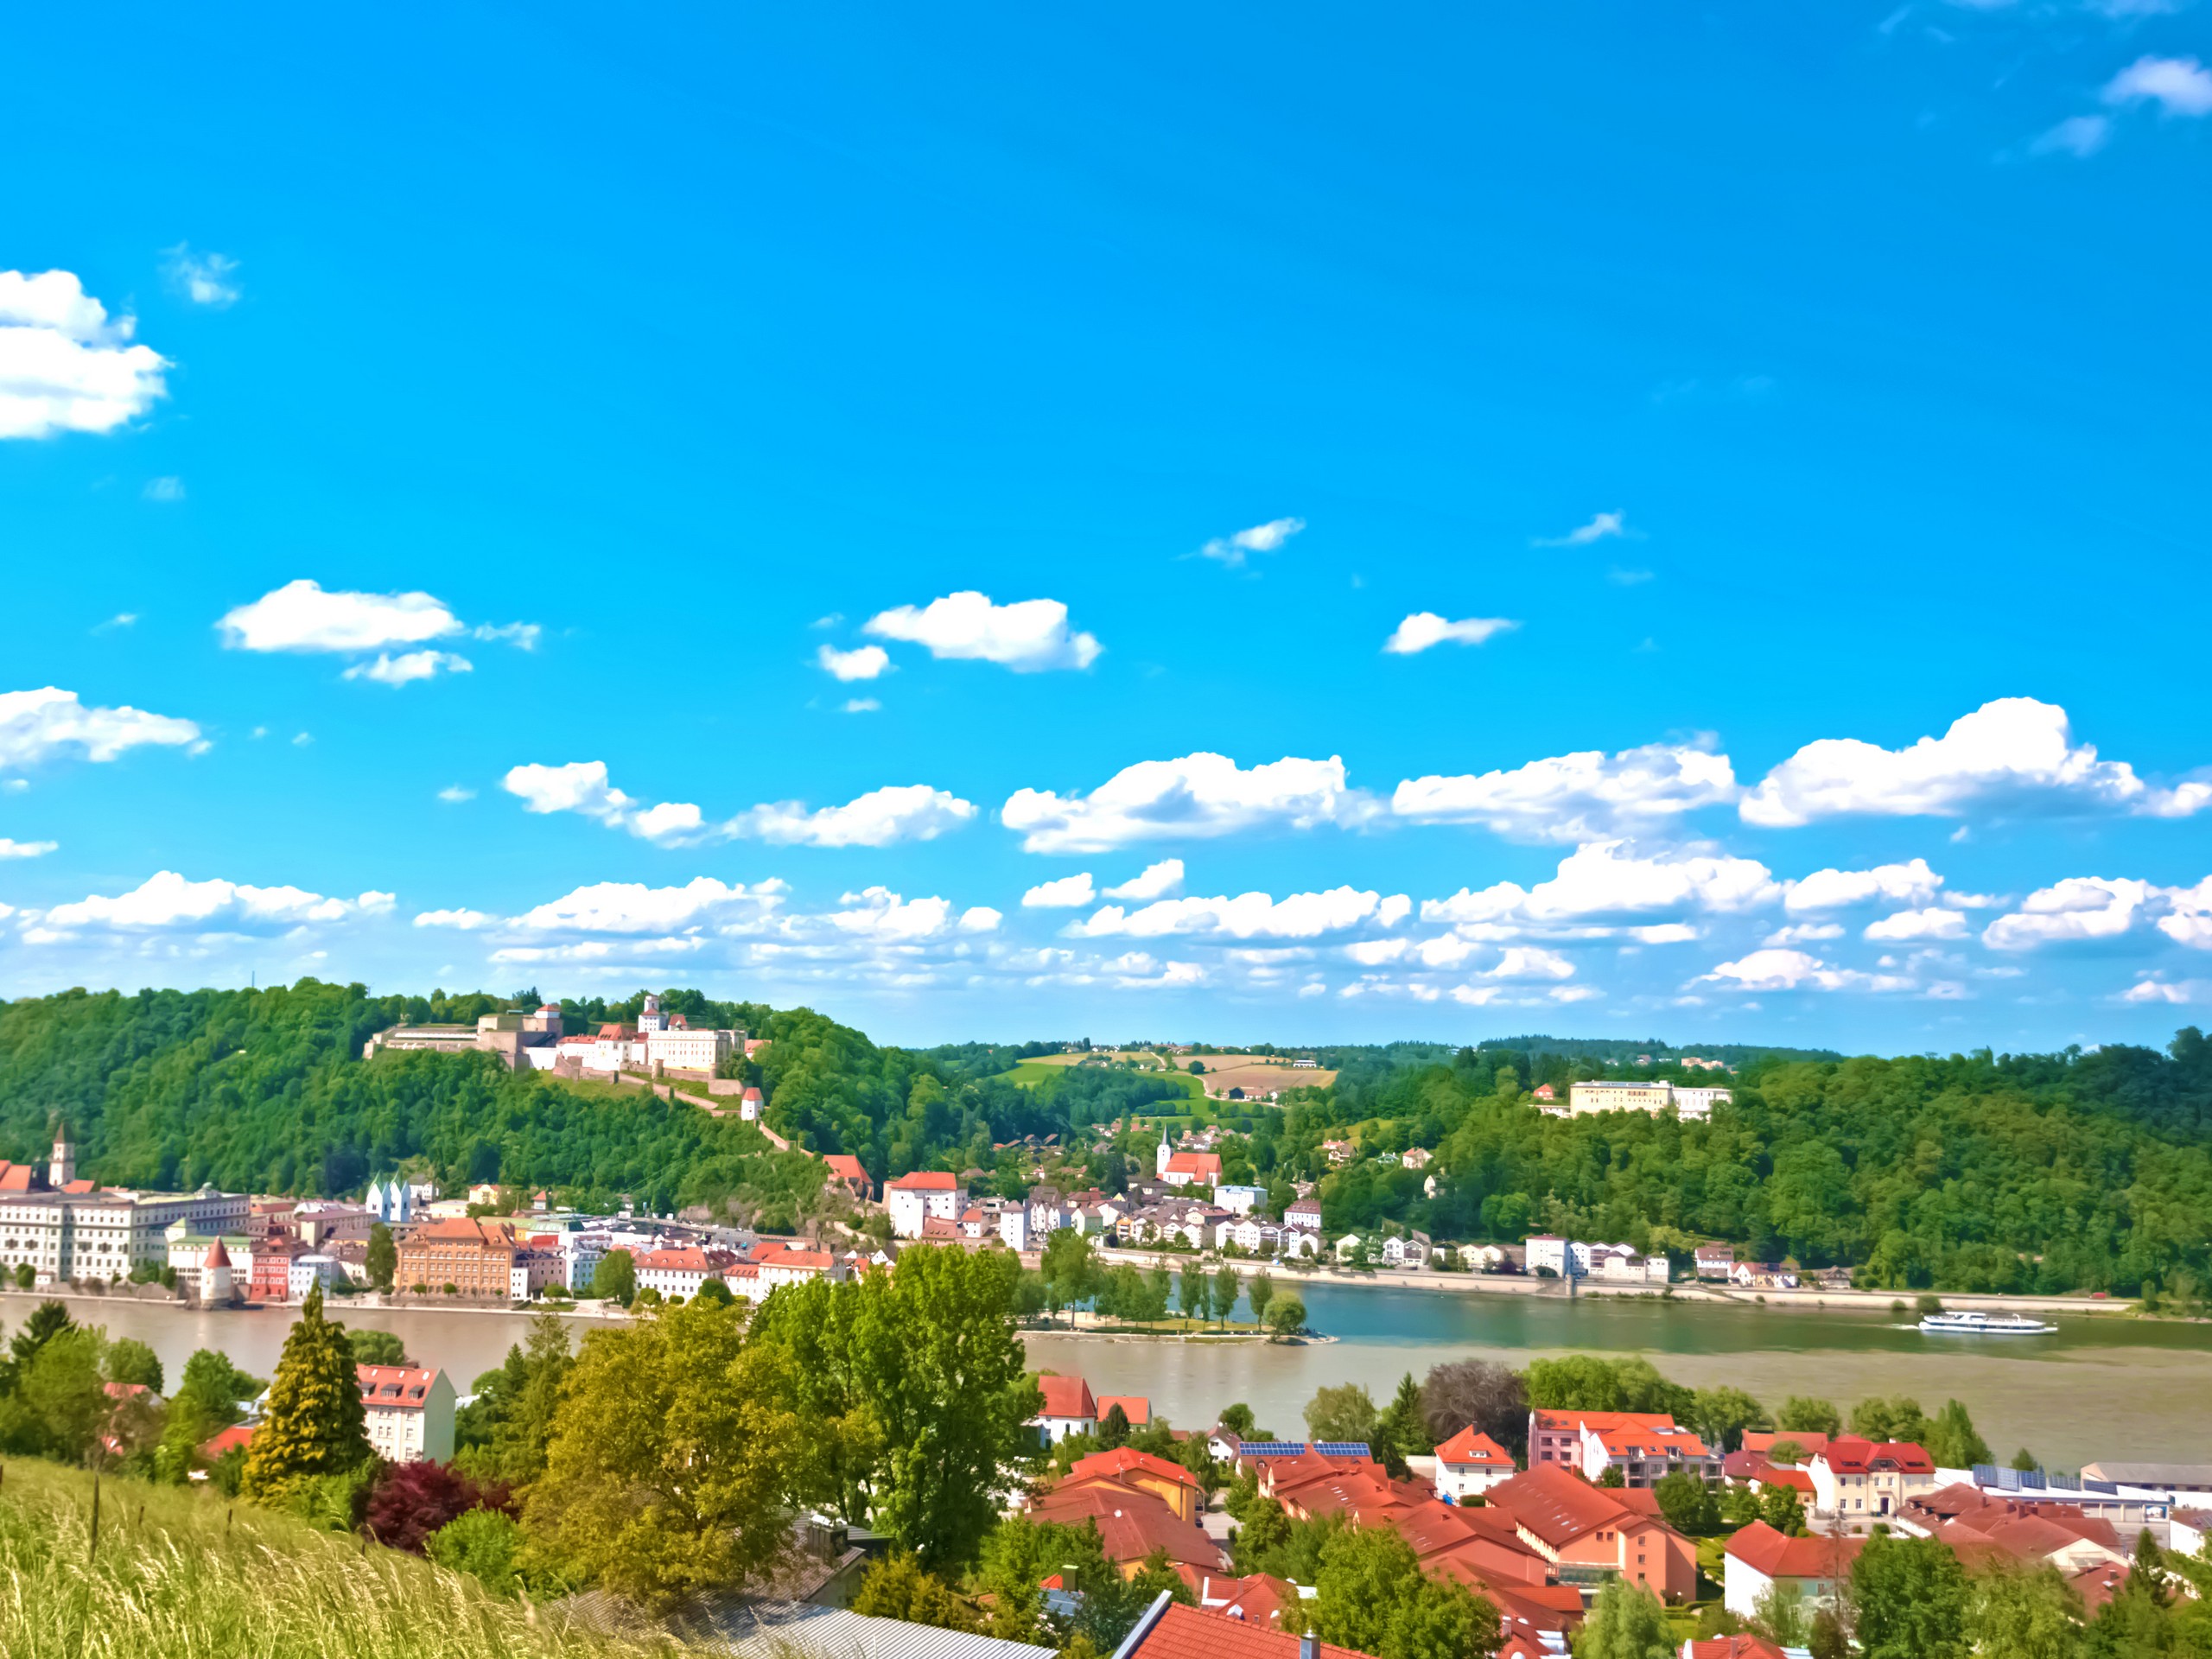 Cycling to Passau along the Danube river